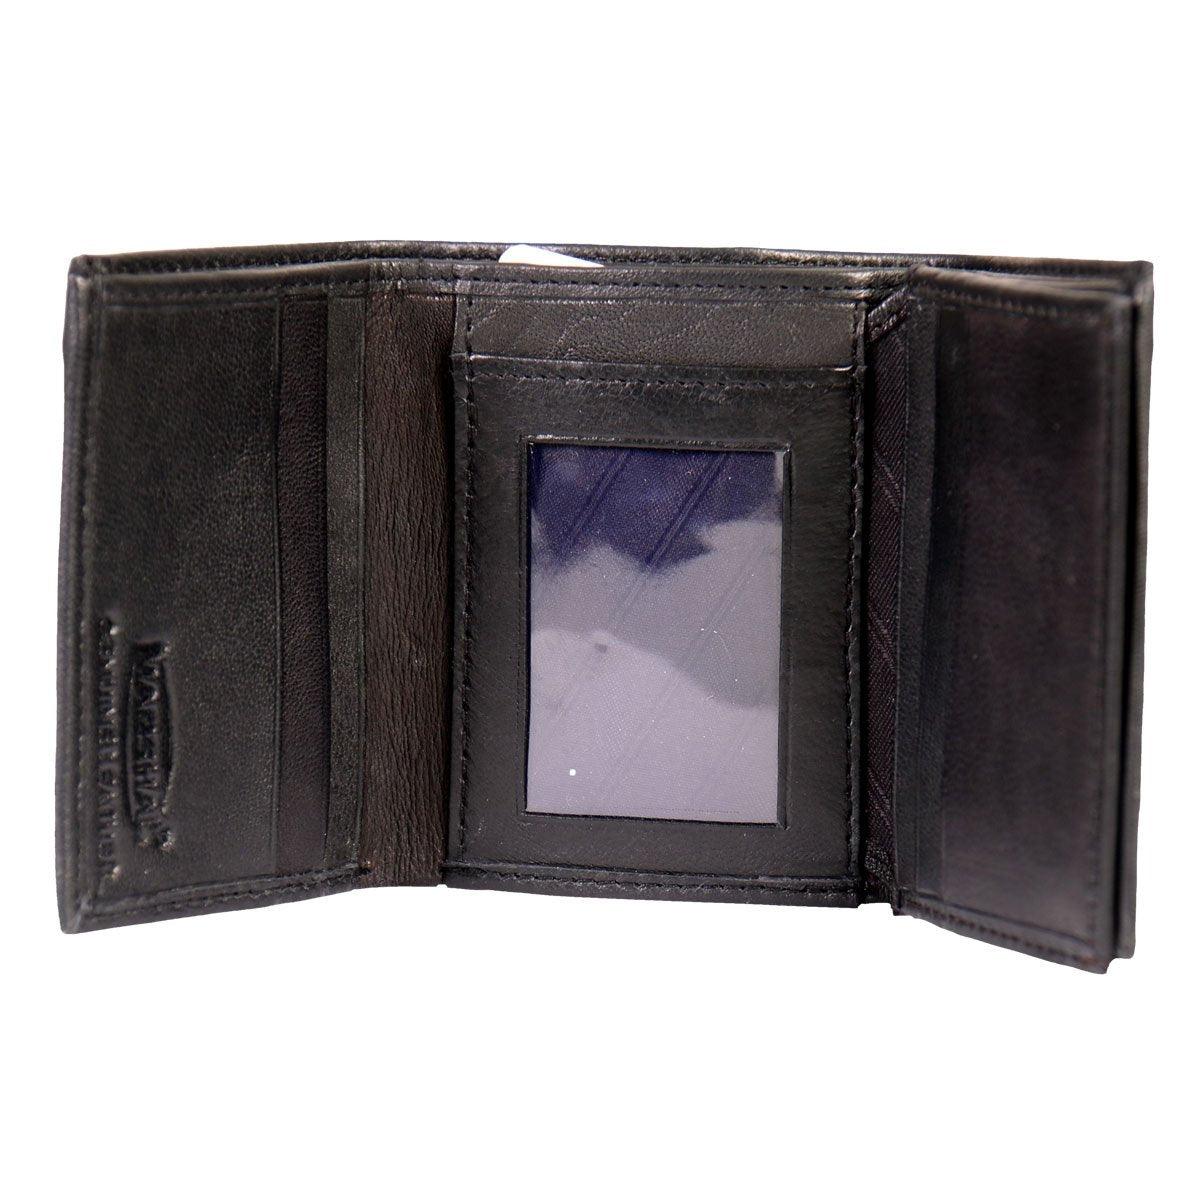 Hot Leathers Rfid Tri Fold Leather Wallet - American Legend Rider